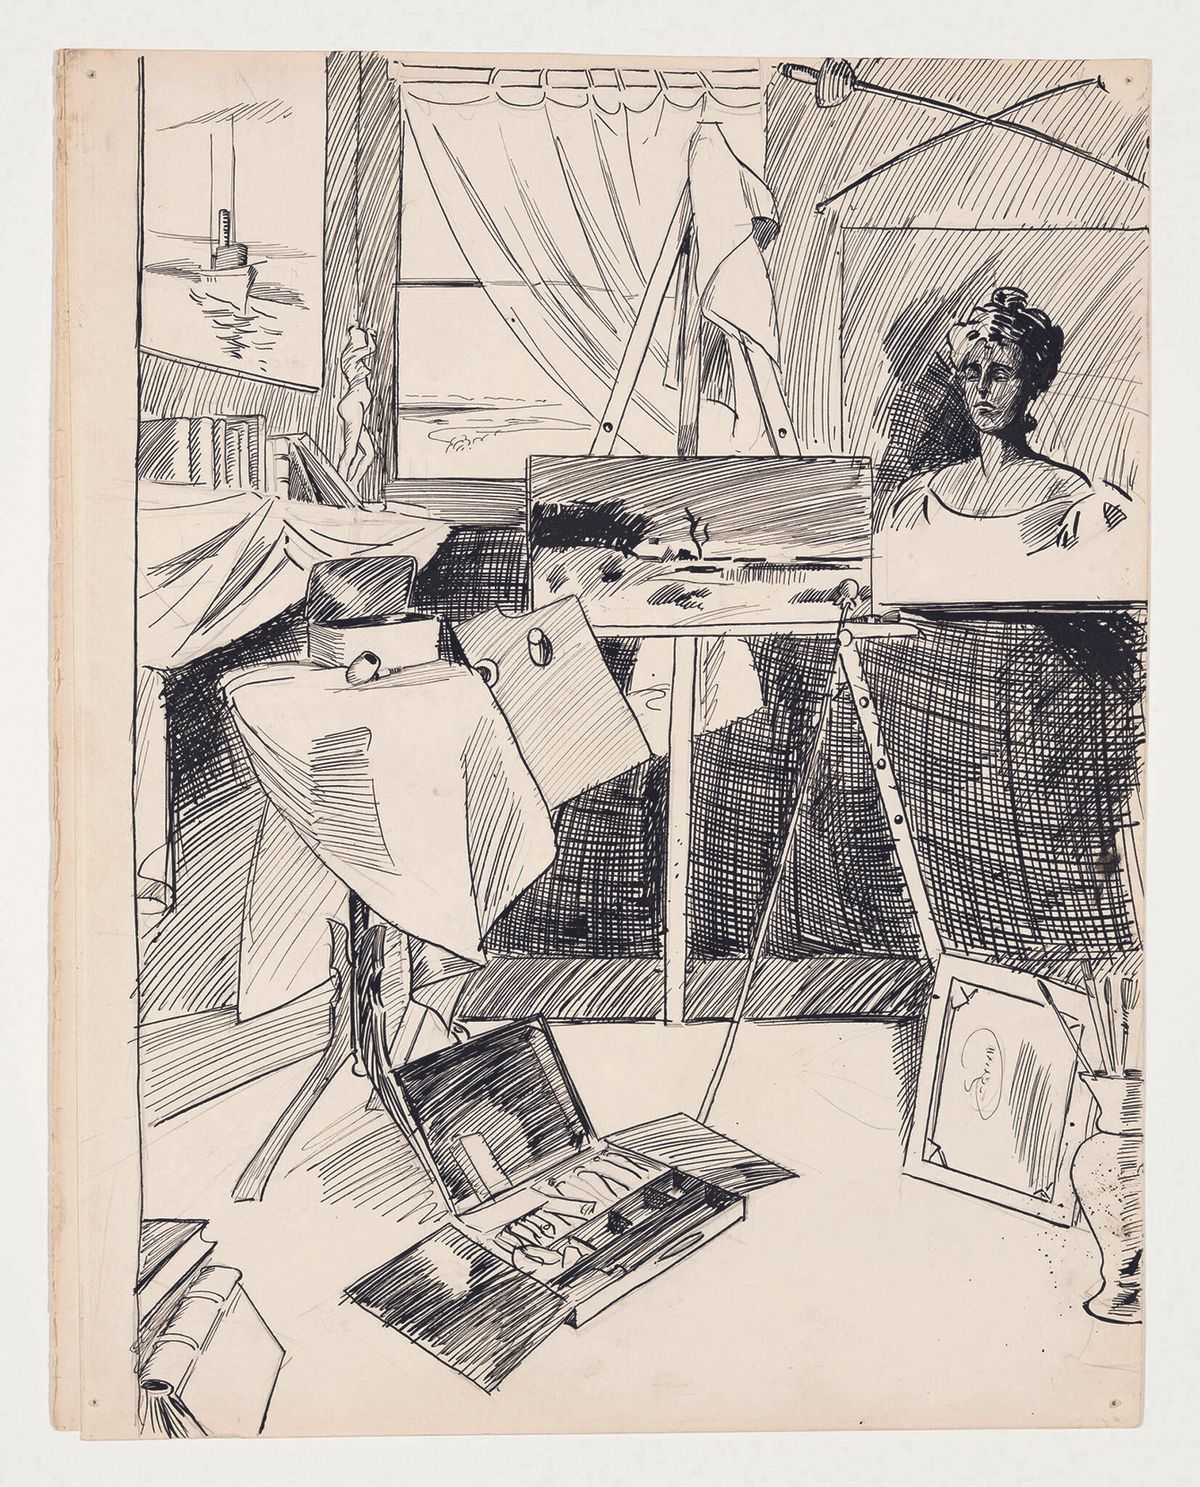 Hopper’s drawing of his studio in the attic of the family home (around 1900), with a painting on the easel. The painting and easel, together with the attic’s contents, came to be owned by the reverend Sanborn

©️ 2022 Heirs of Josephine N. Hopper/Licensed by Artists Rights Society (ARS)